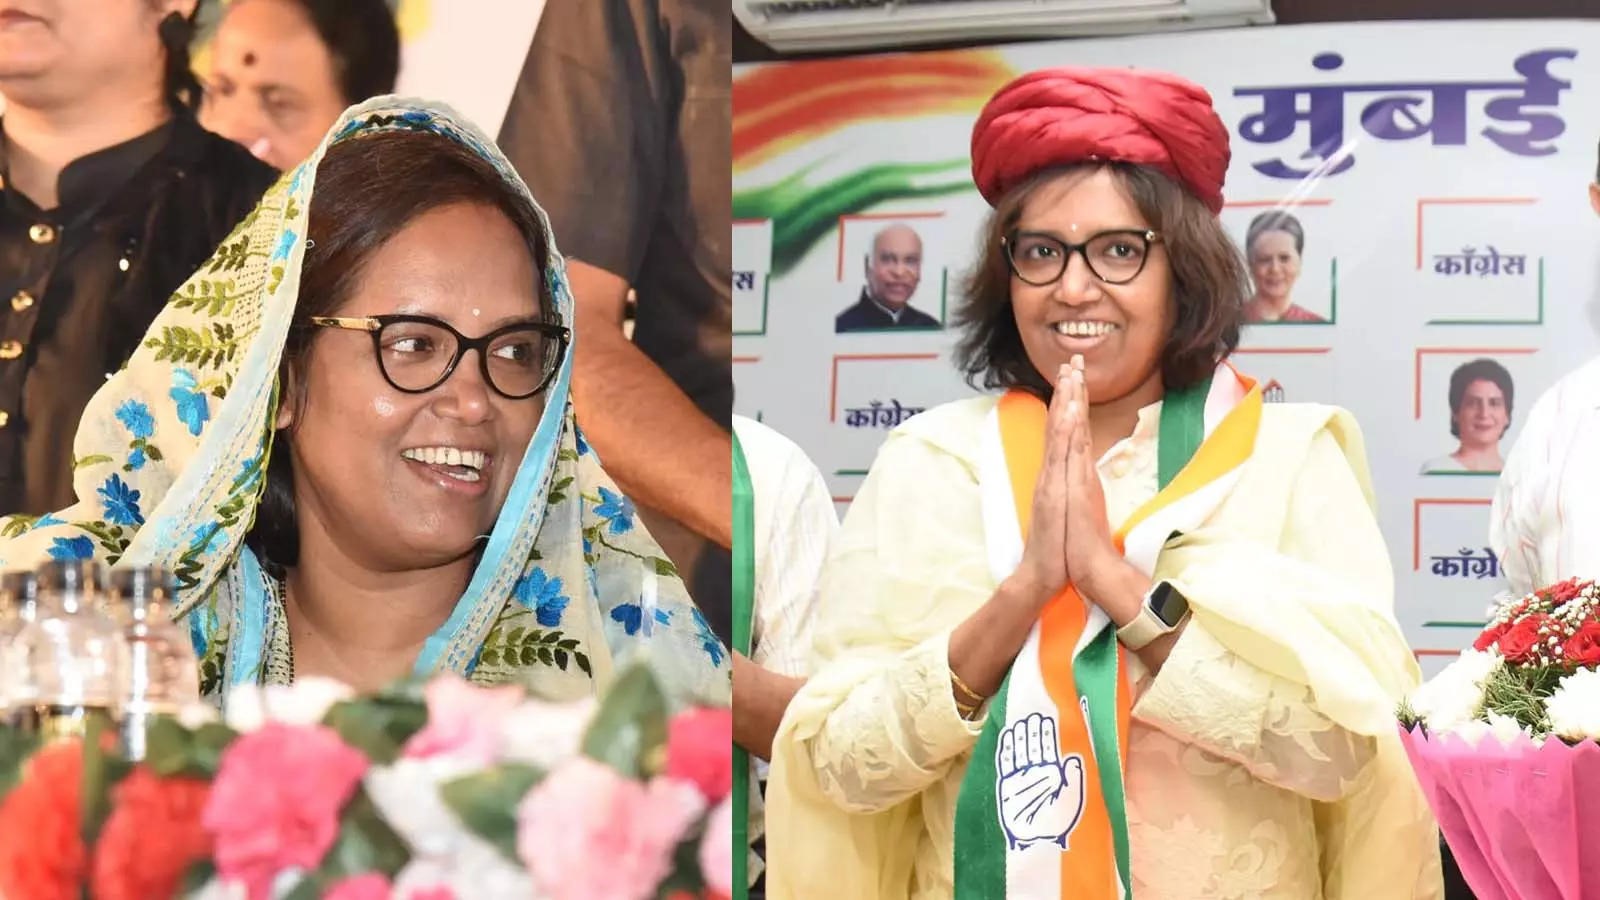 Varsha-Gaikwad--the-chief-of-the-Mumbai-unit-of-the-Congress-party--is-set-to-run-for-the-Mumbai-North-Central-constituency